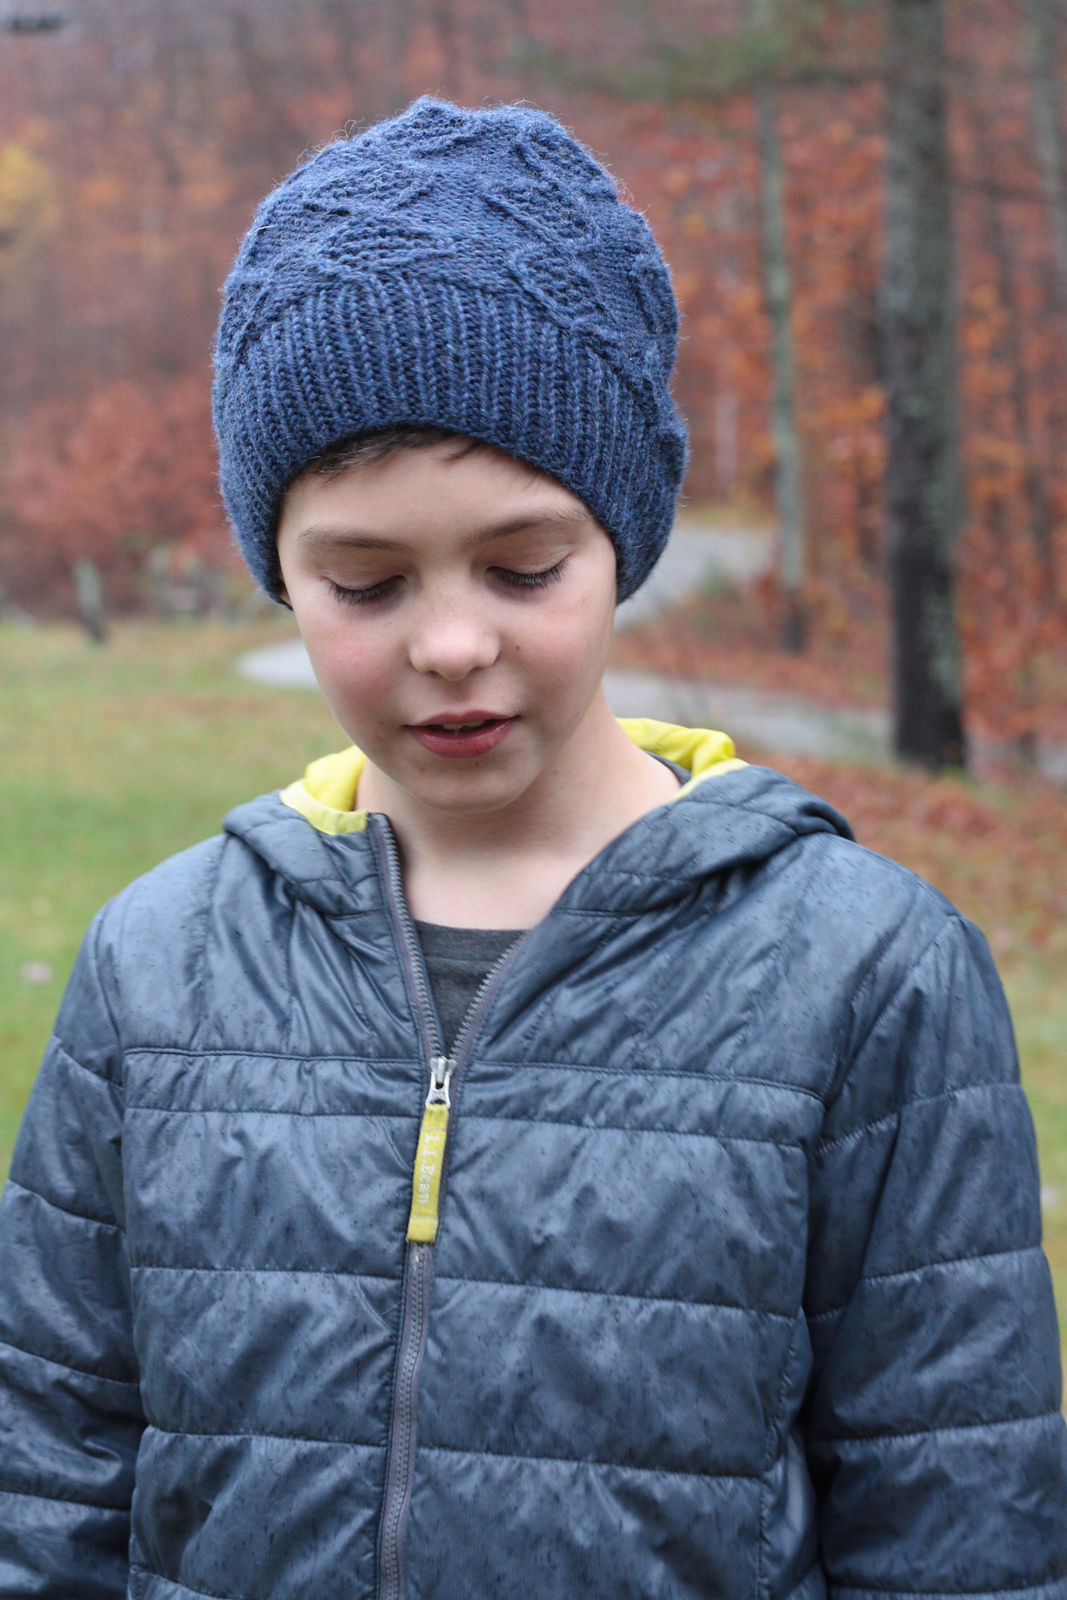 Free Knitting Patterns For Teens Childrens And Teen Hat Nye Knitting Pattern Cables